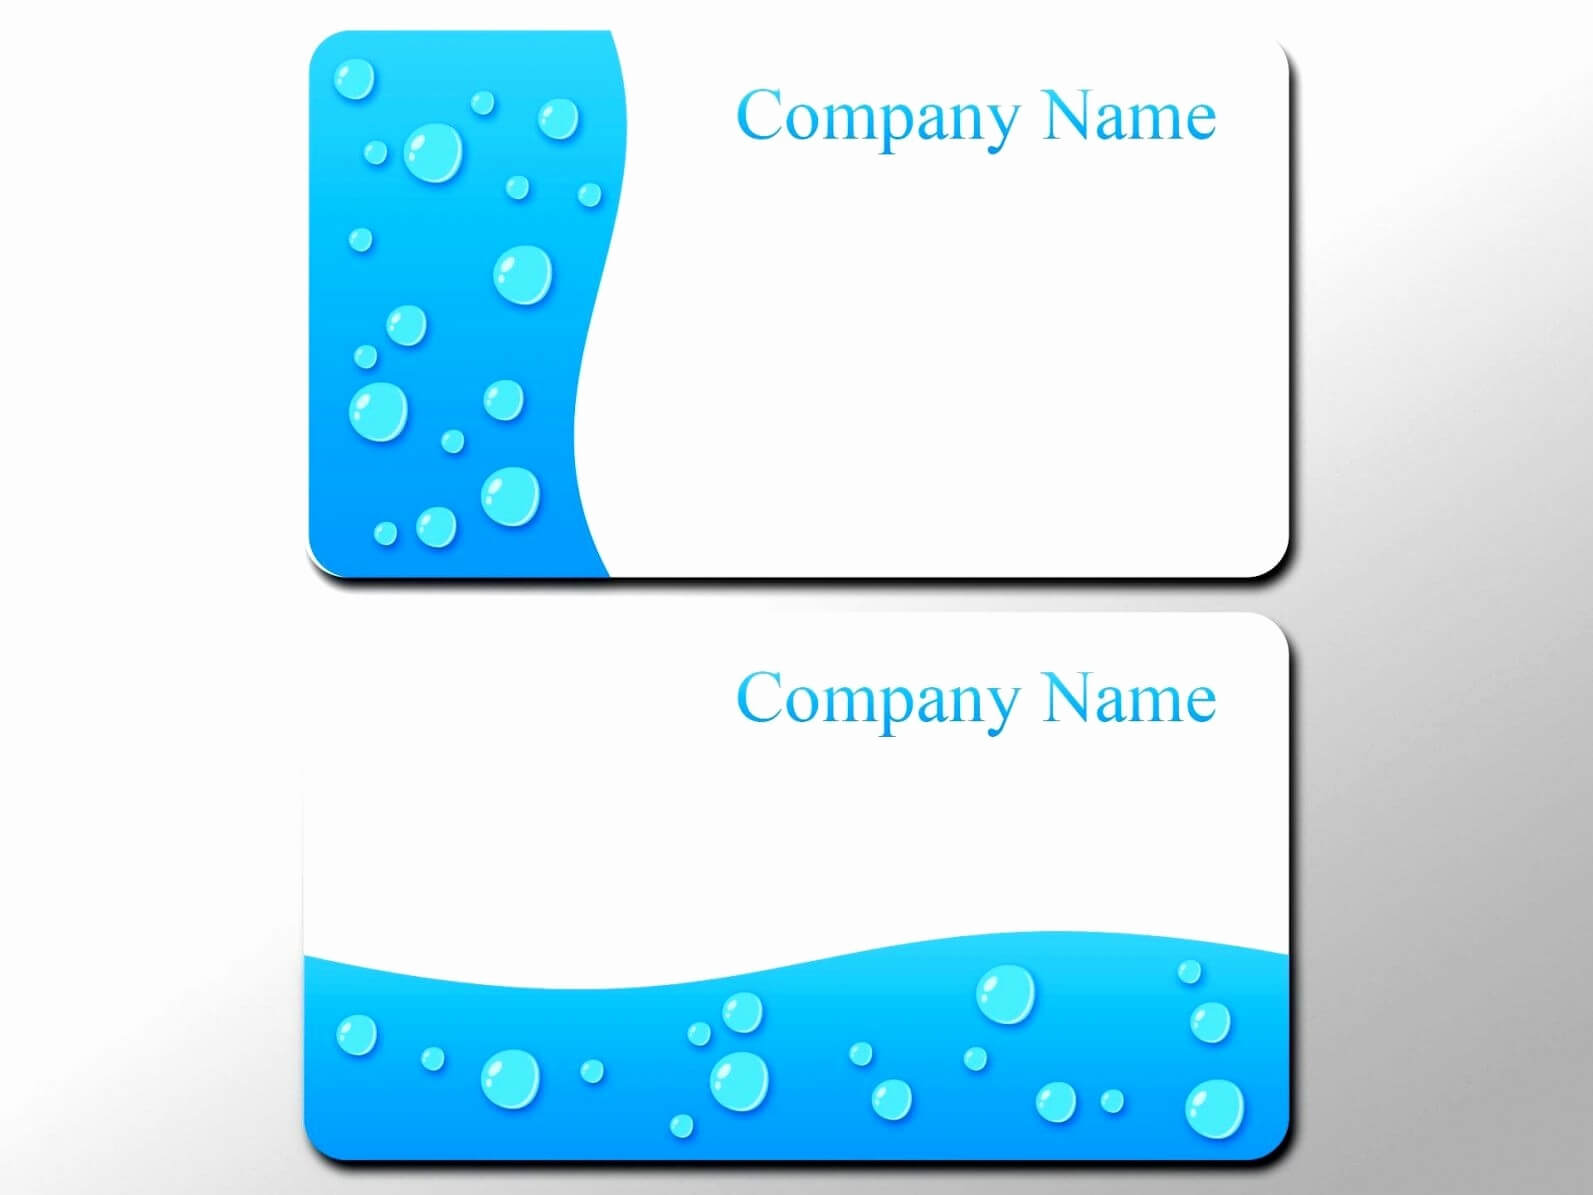 Business Card Format Photoshop Template Cc Beautiful For With Business Card Template Size Photoshop